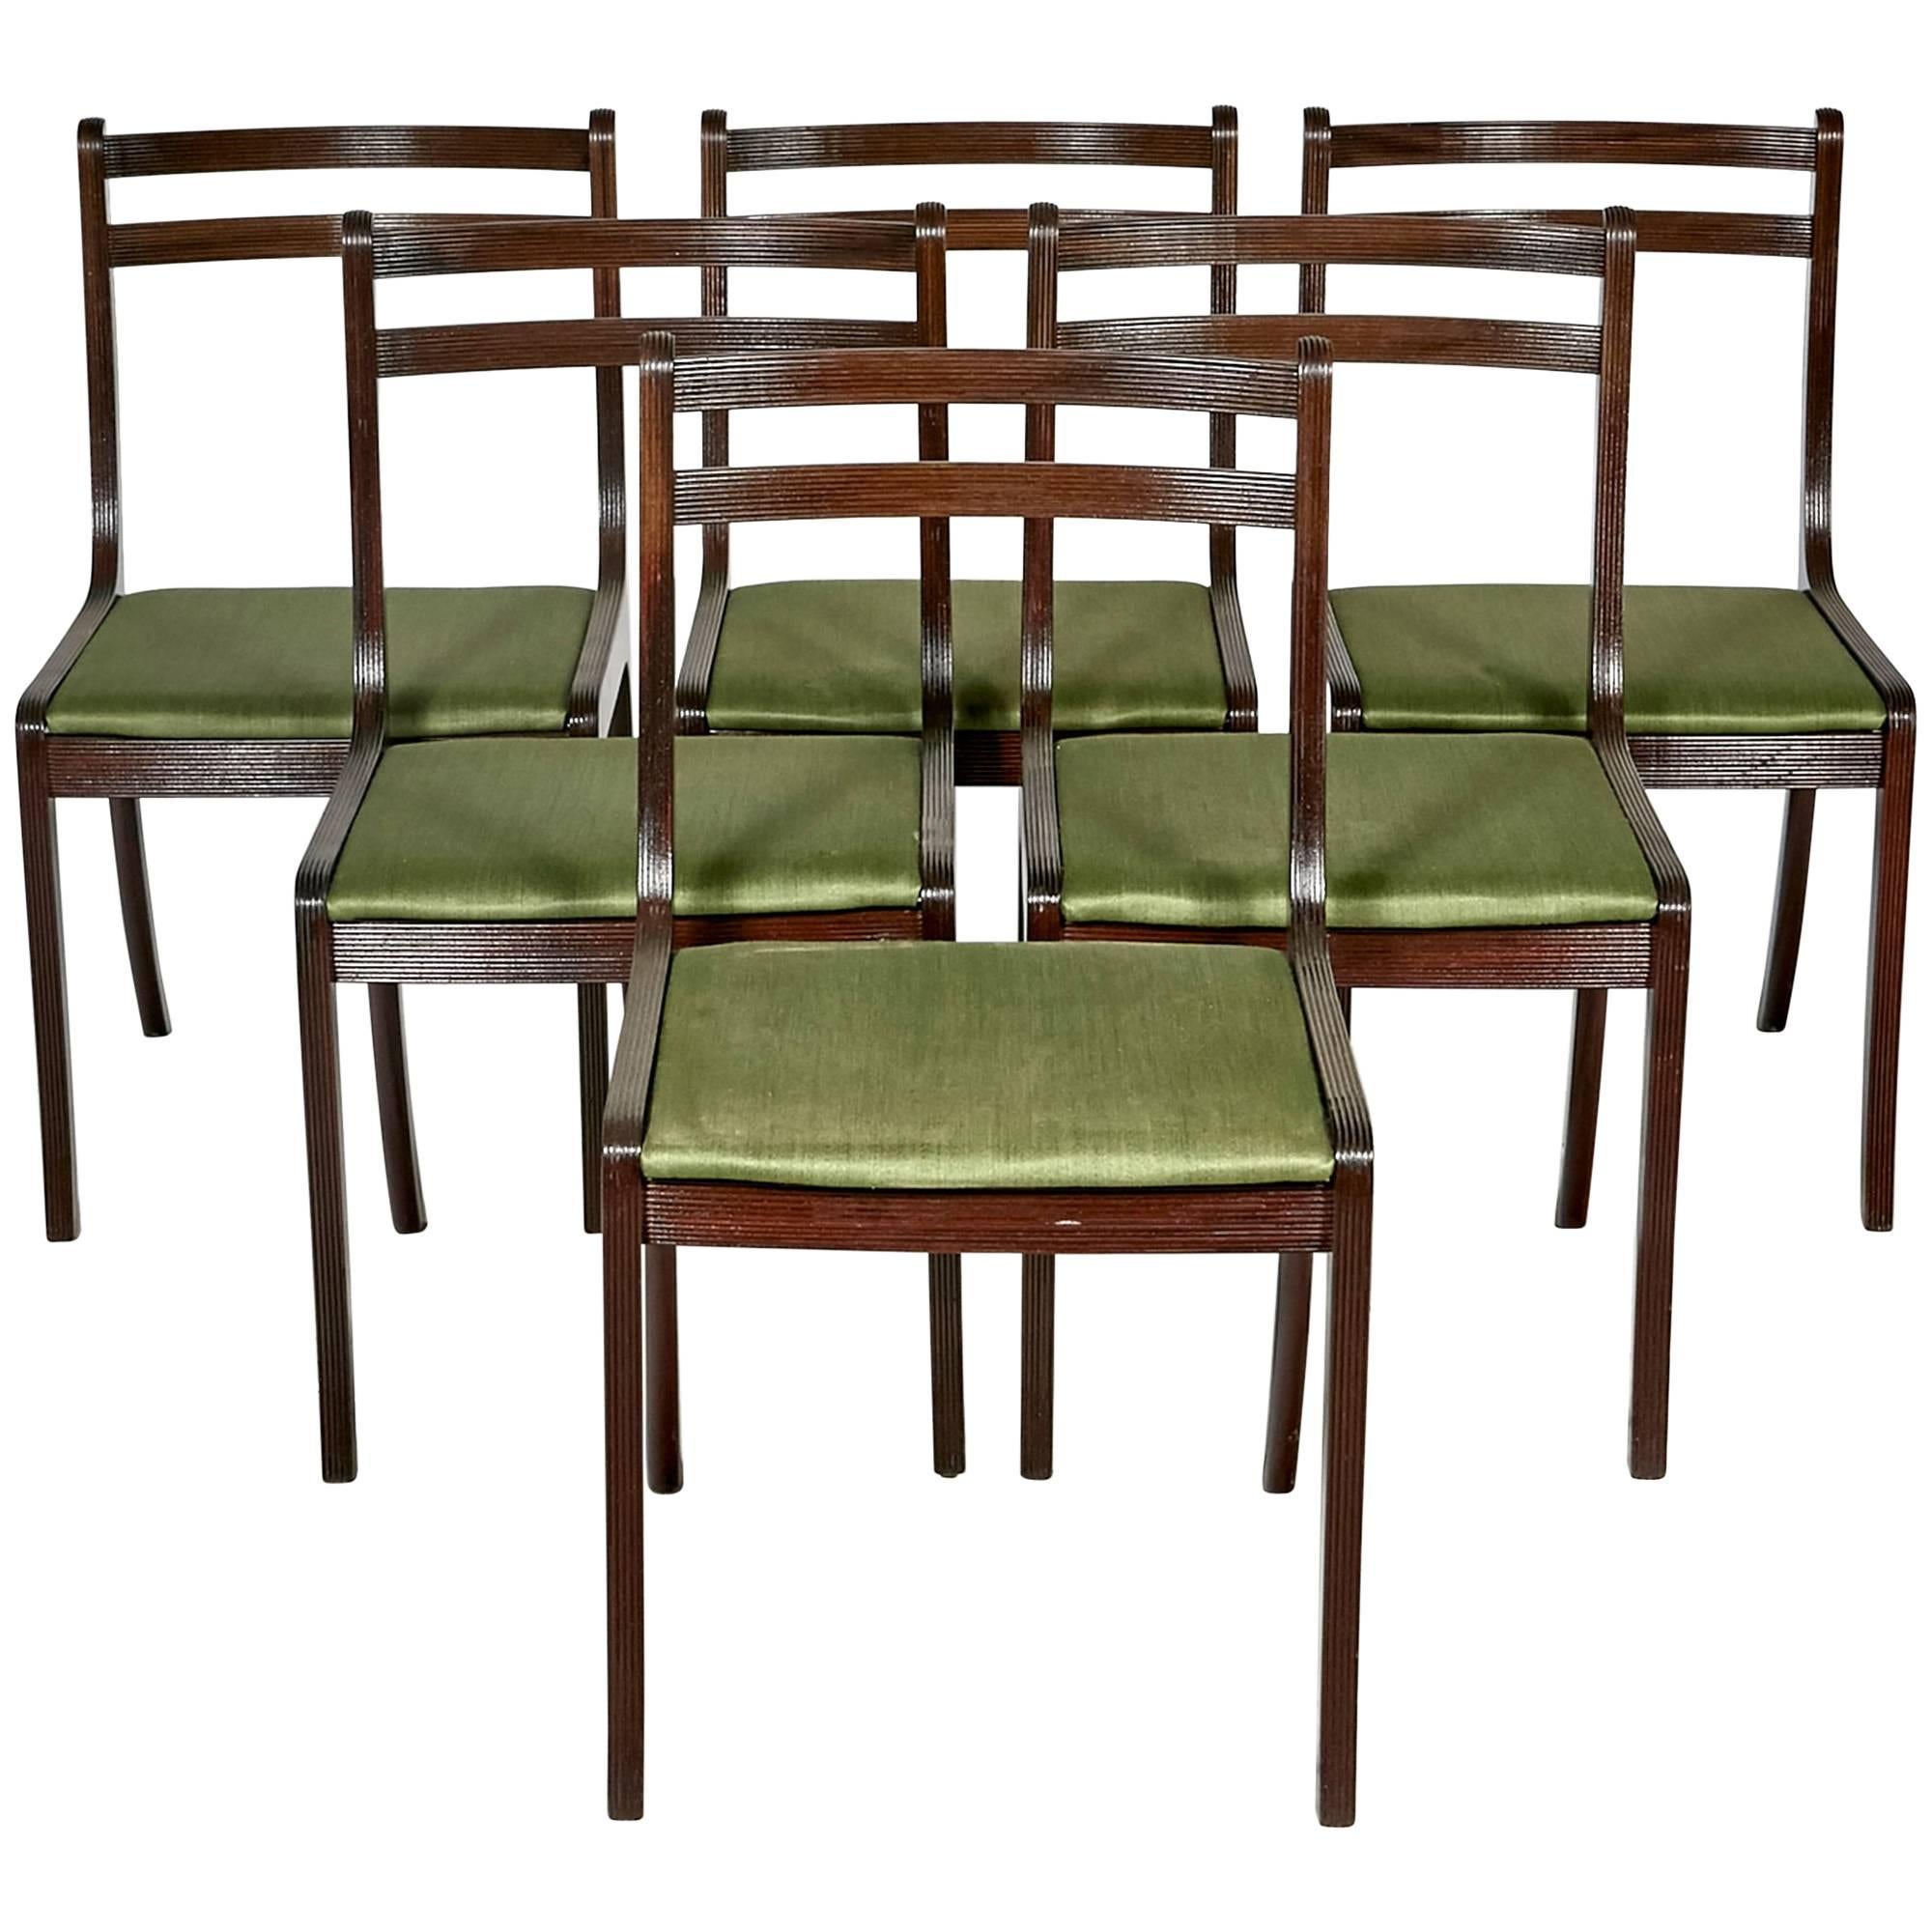 Danish Mahogany Dining Chairs by Ole Wanscher for Poul Jeppesen, 1960s For Sale